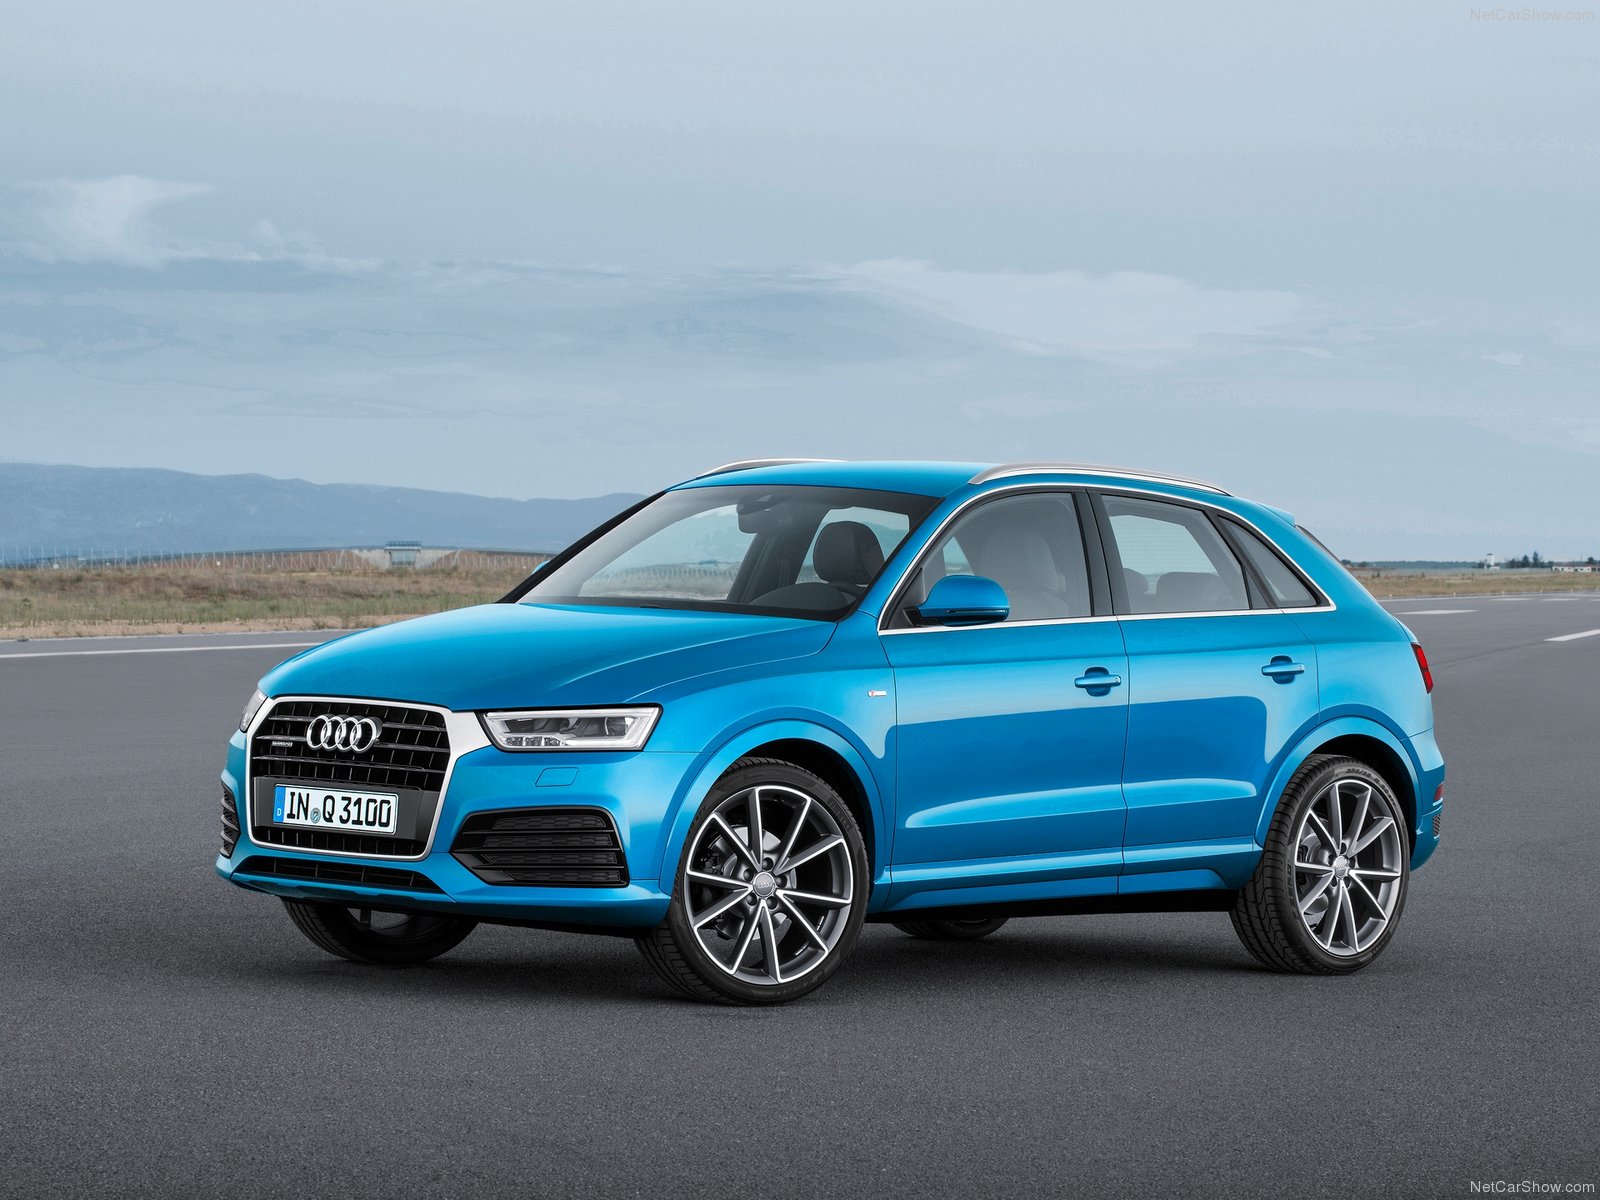 Audi to launch the facelifted Q3 on June 18